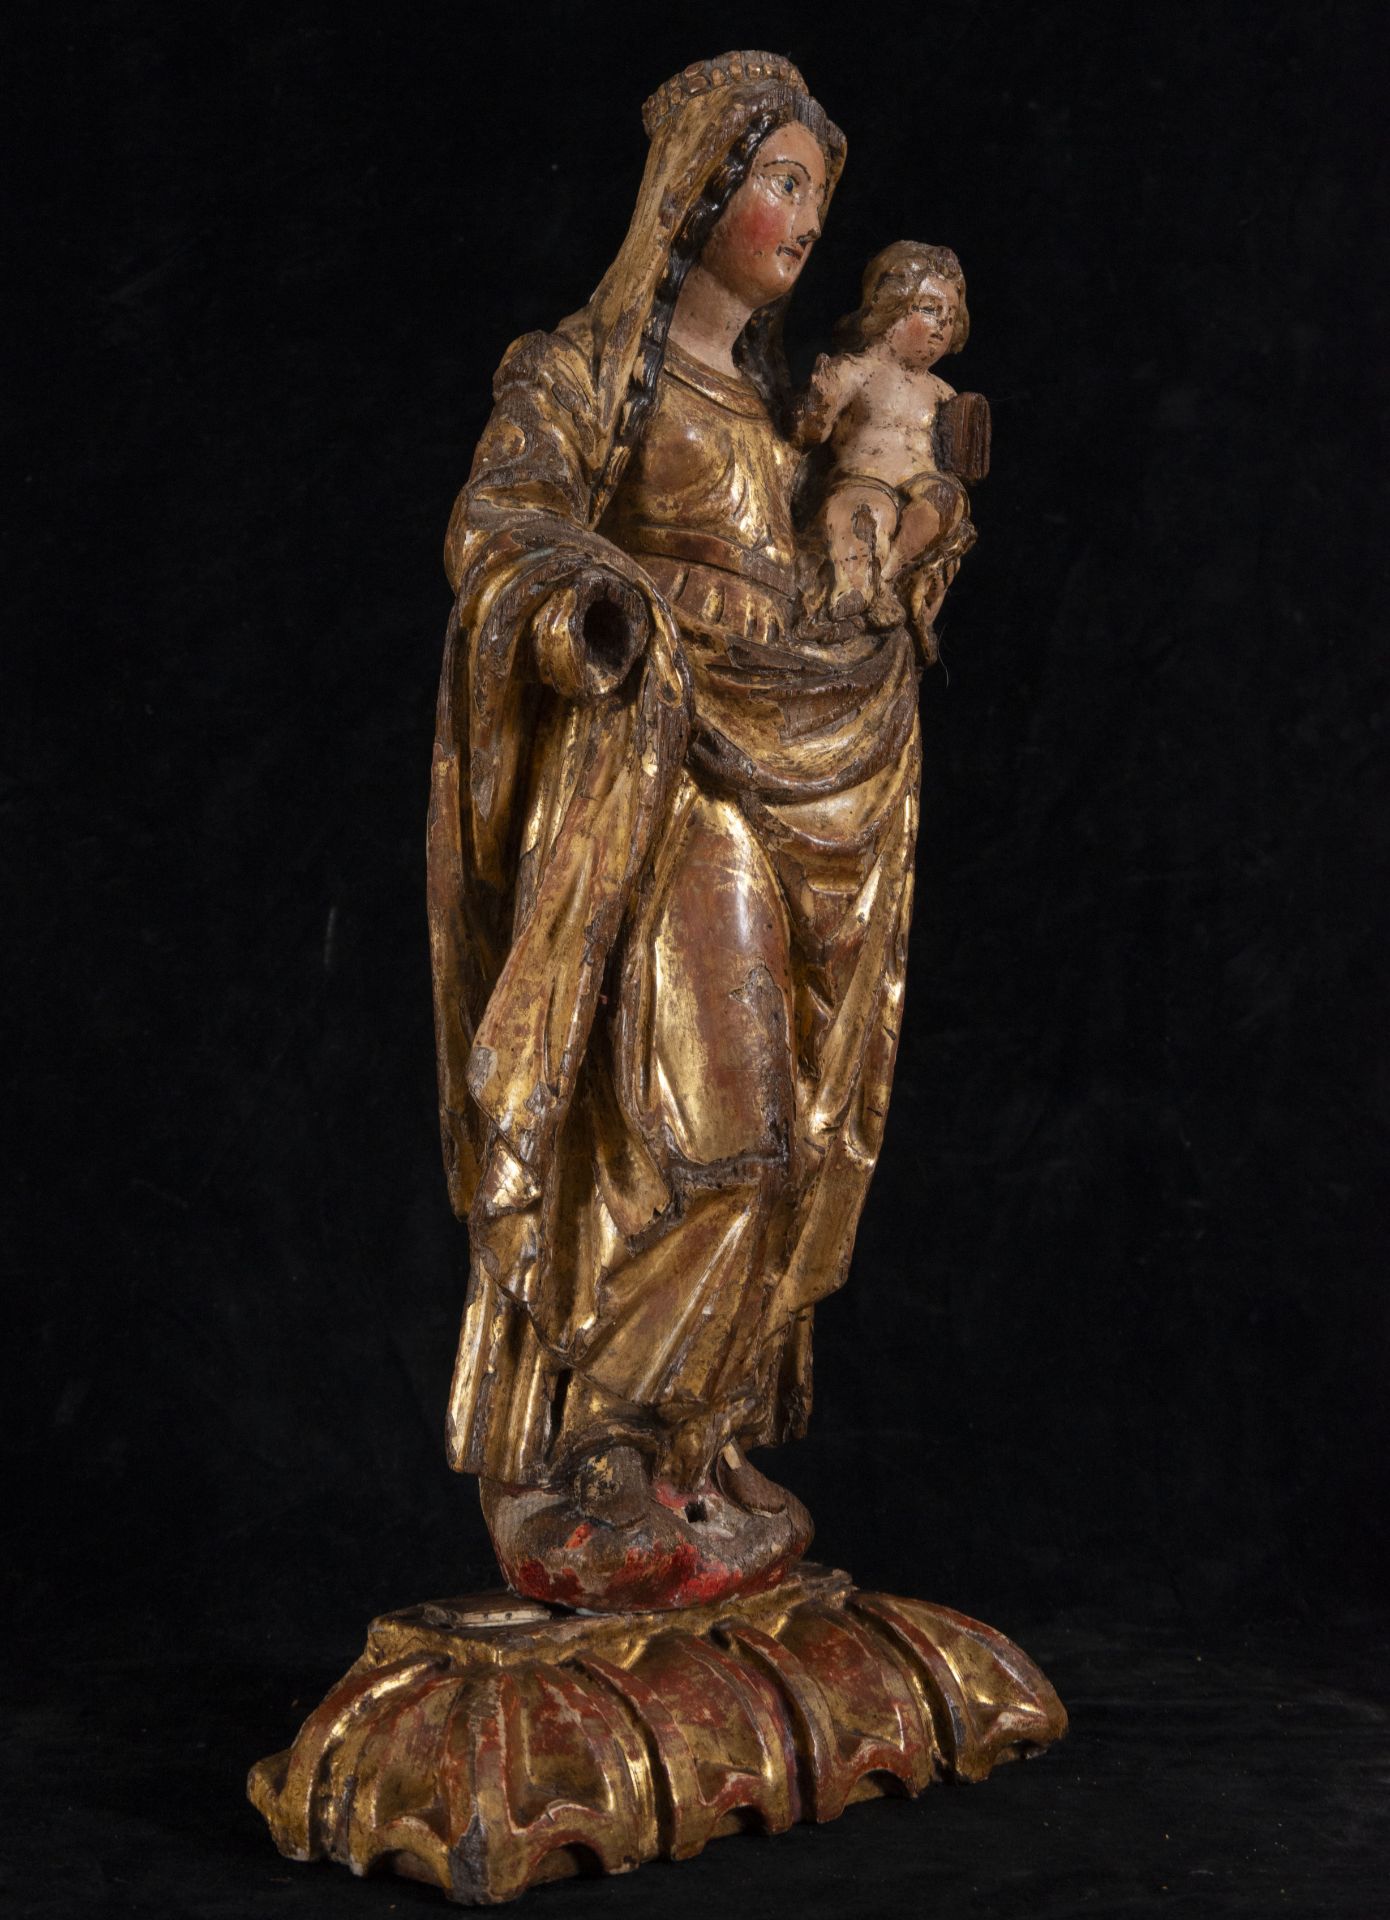 Virgen del Sombrero with Child God in Arms, Hispano Flemish school of the 16th century, Burgos or Pa - Image 3 of 4